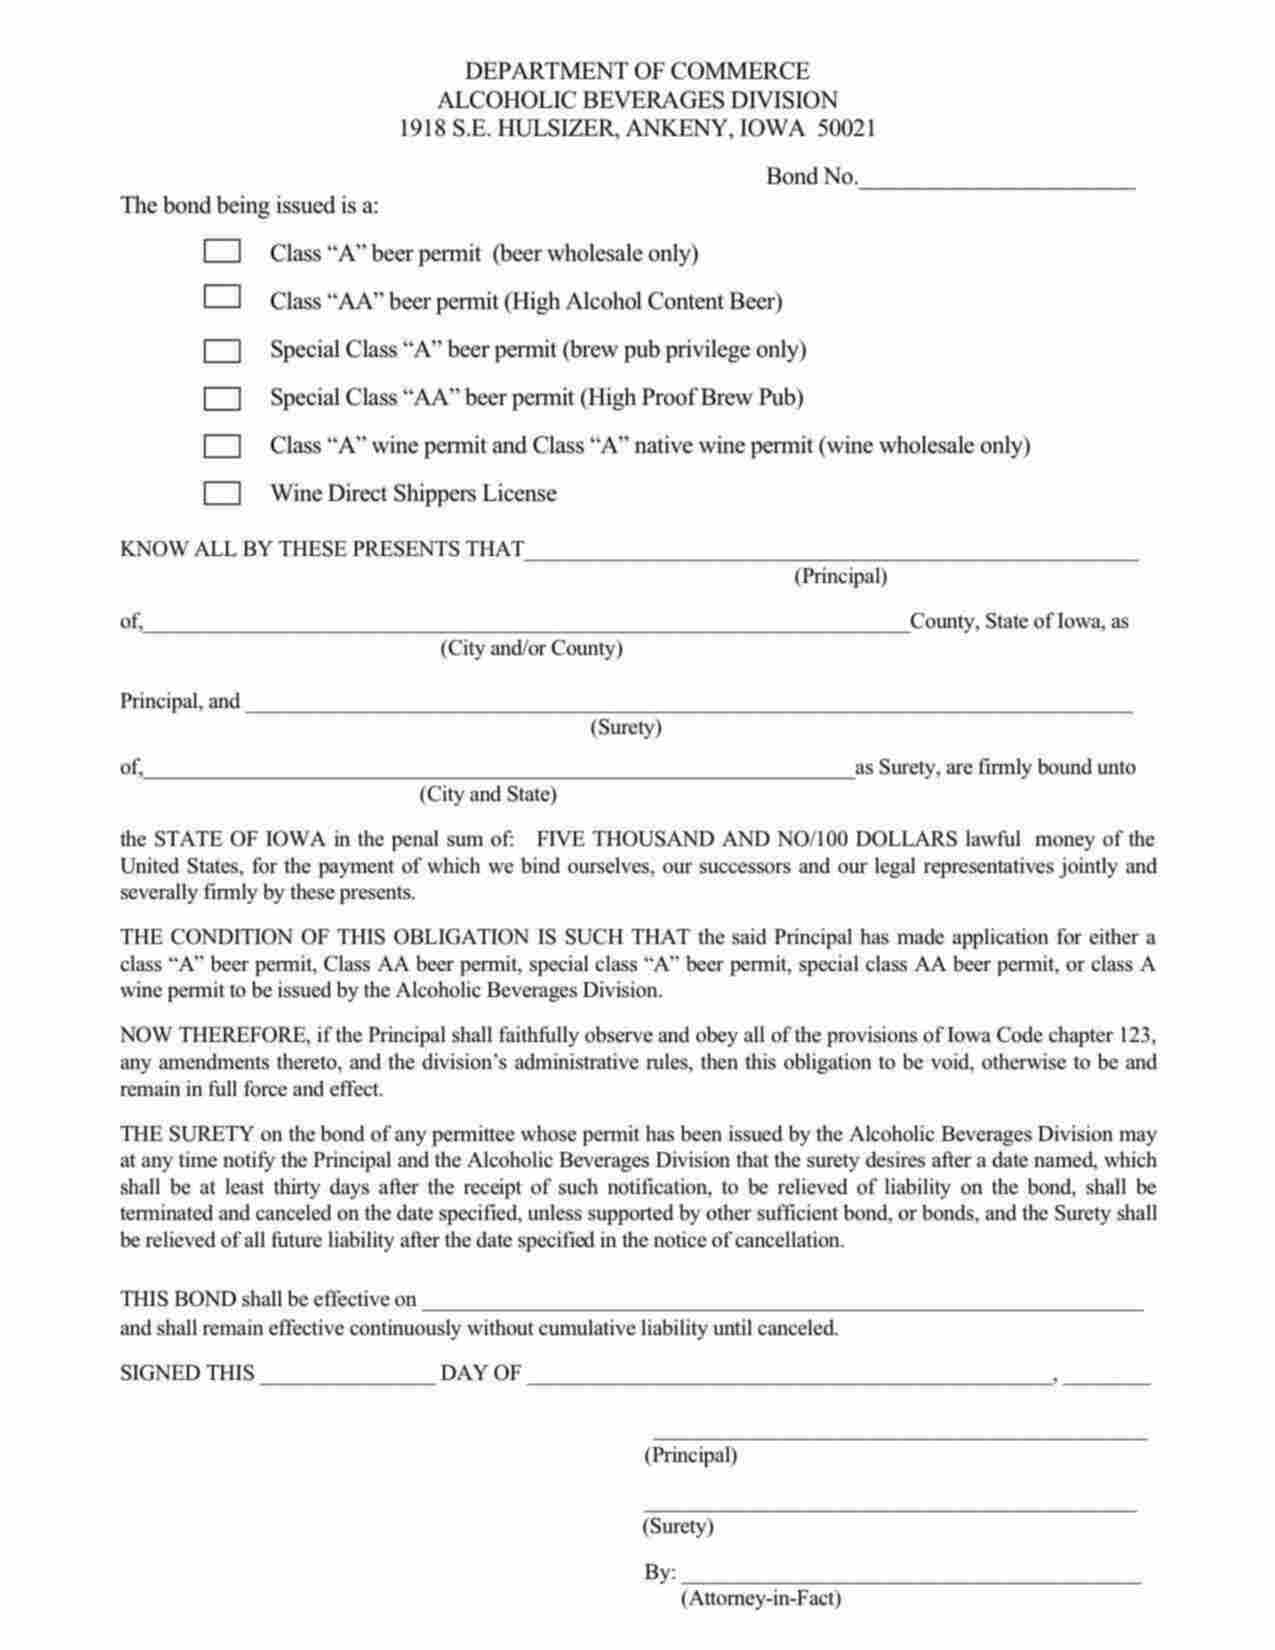 Iowa Class A Beer Permit (Beer Wholesale Only) Bond Form